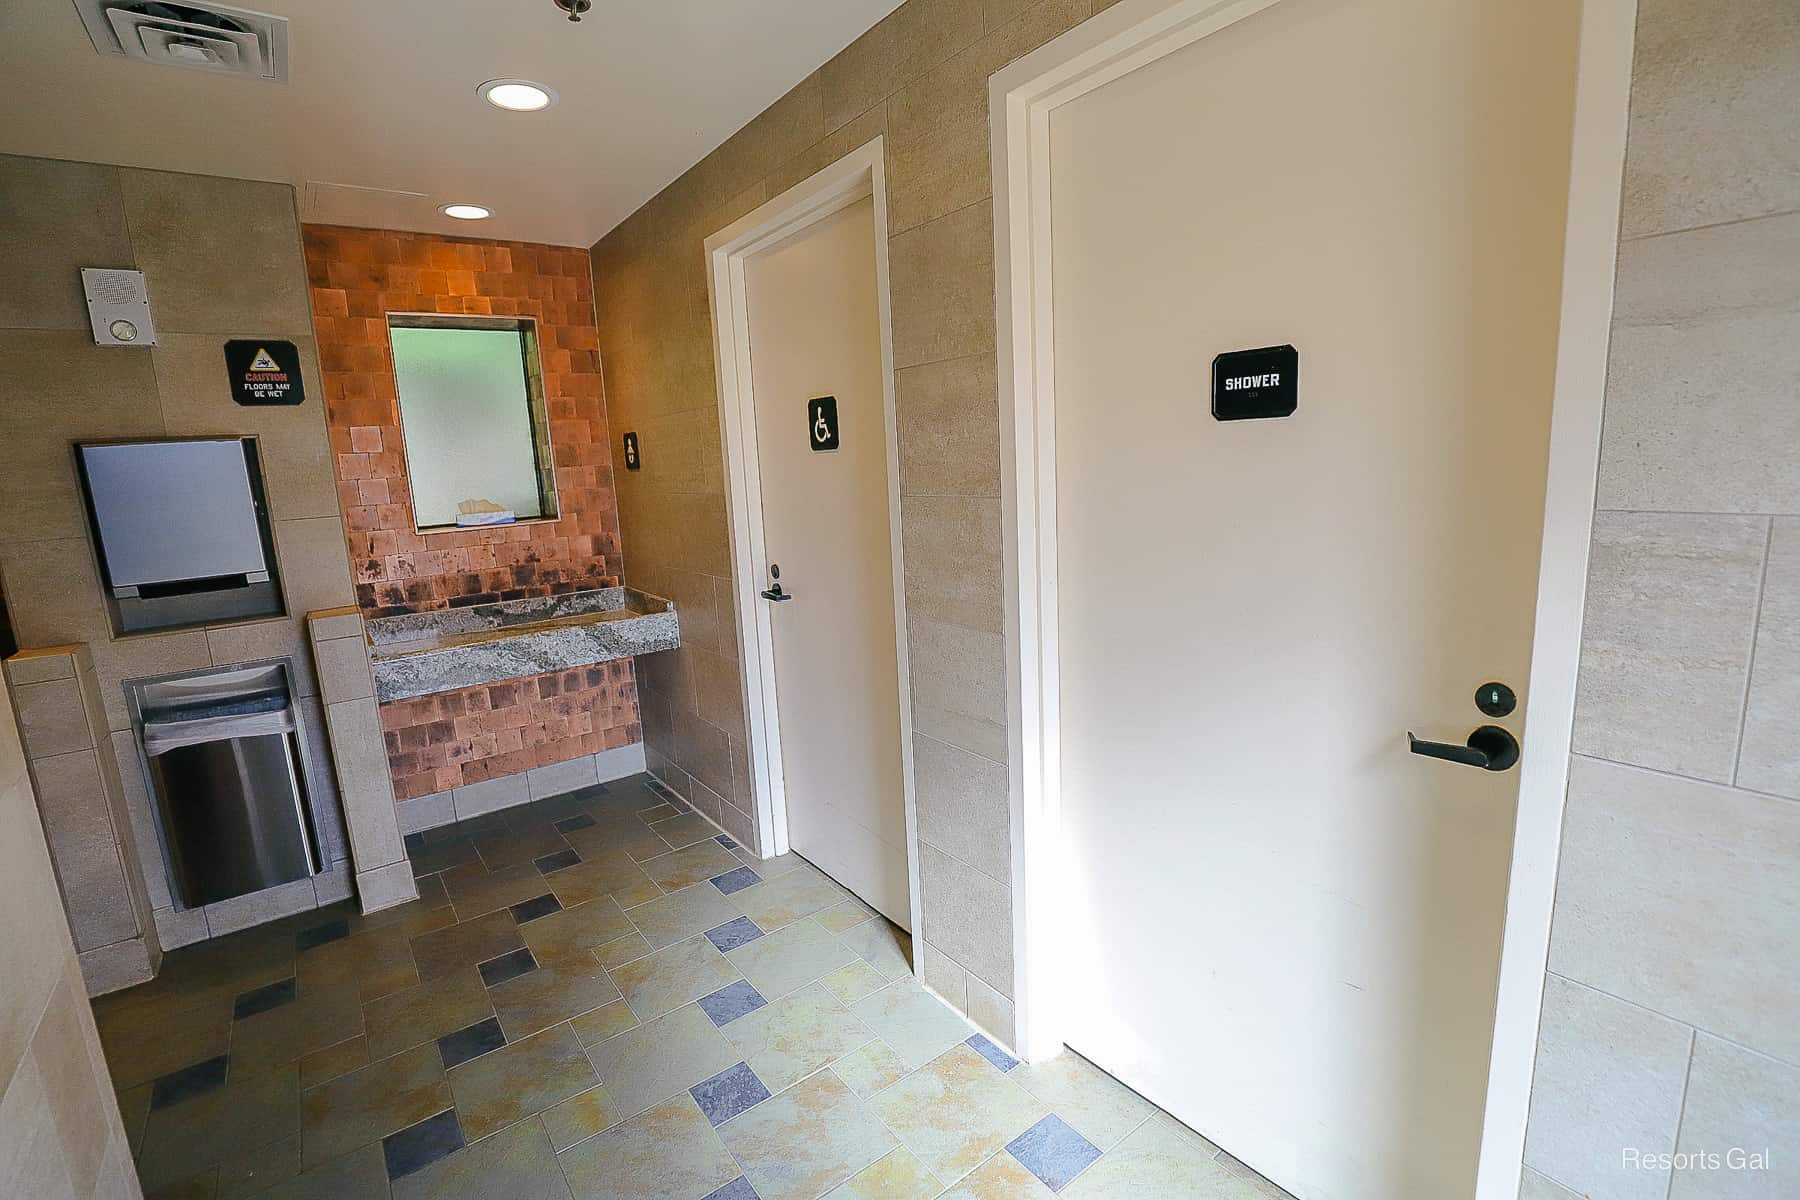 the interior of the pool restroom that shows a handicap area and a shower 